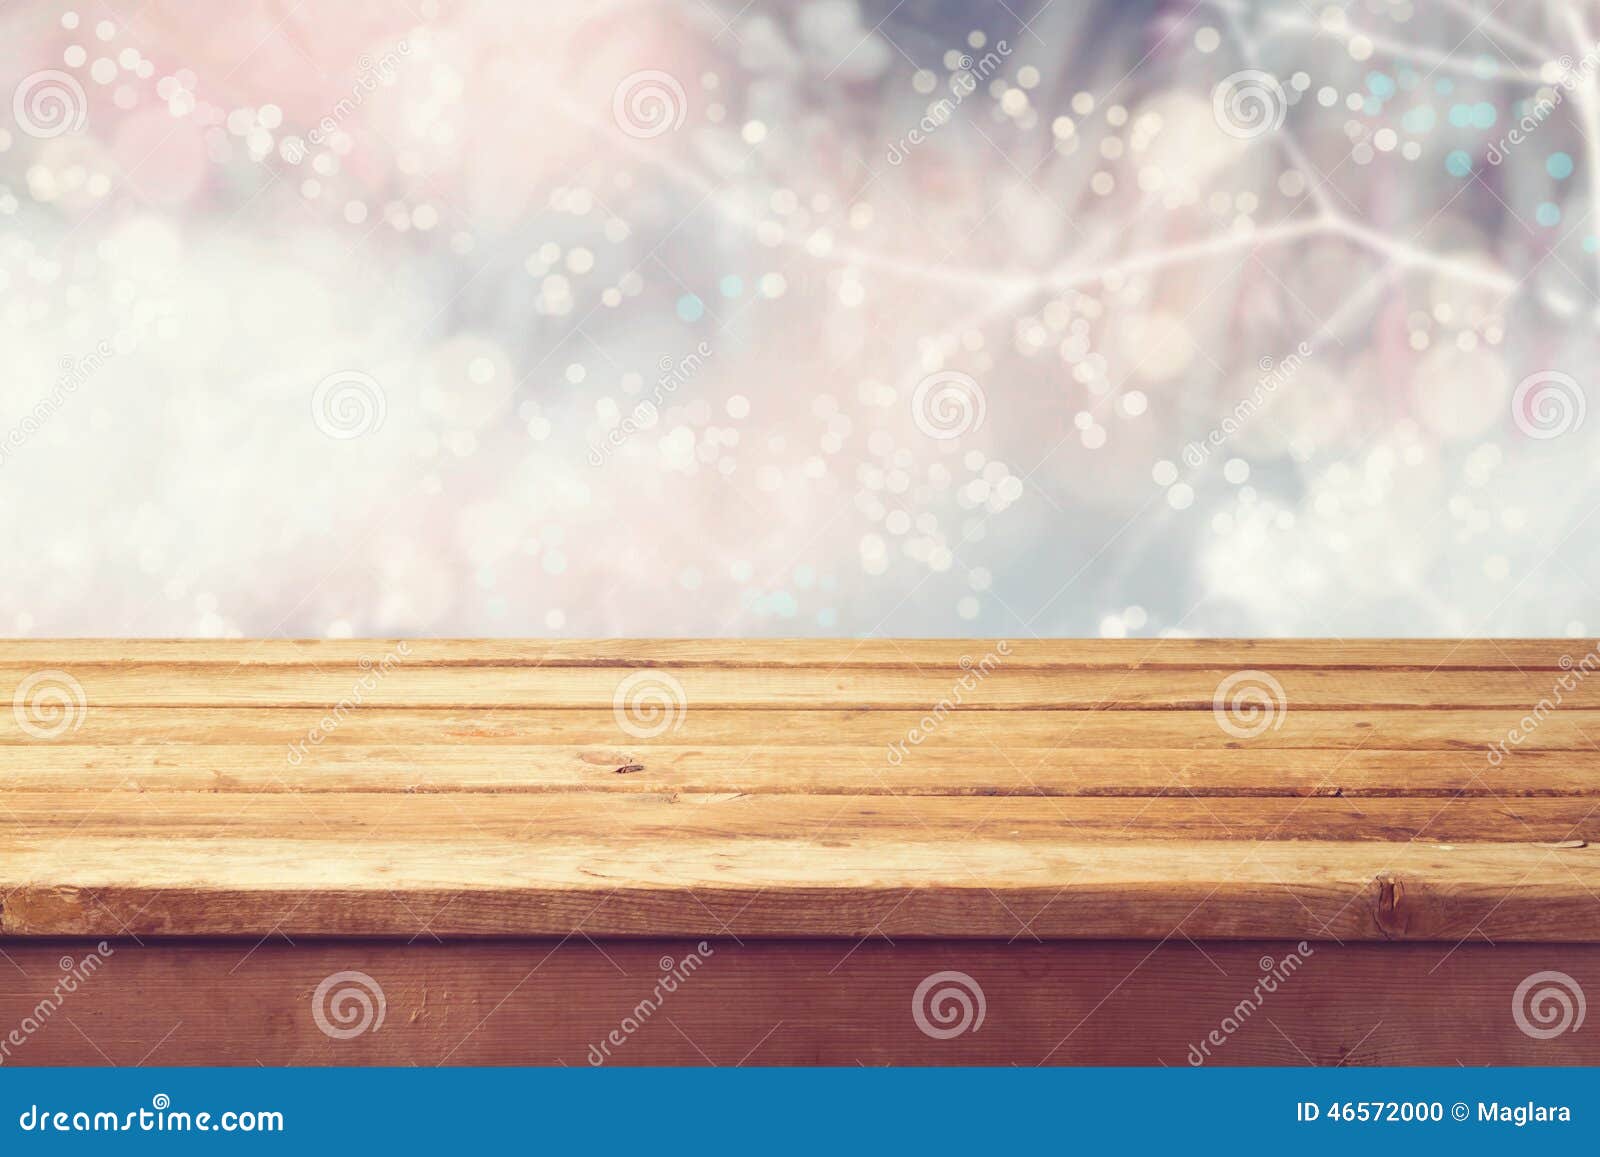 christmas holiday background with empty wooden deck table over winter bokeh. ready for product montage